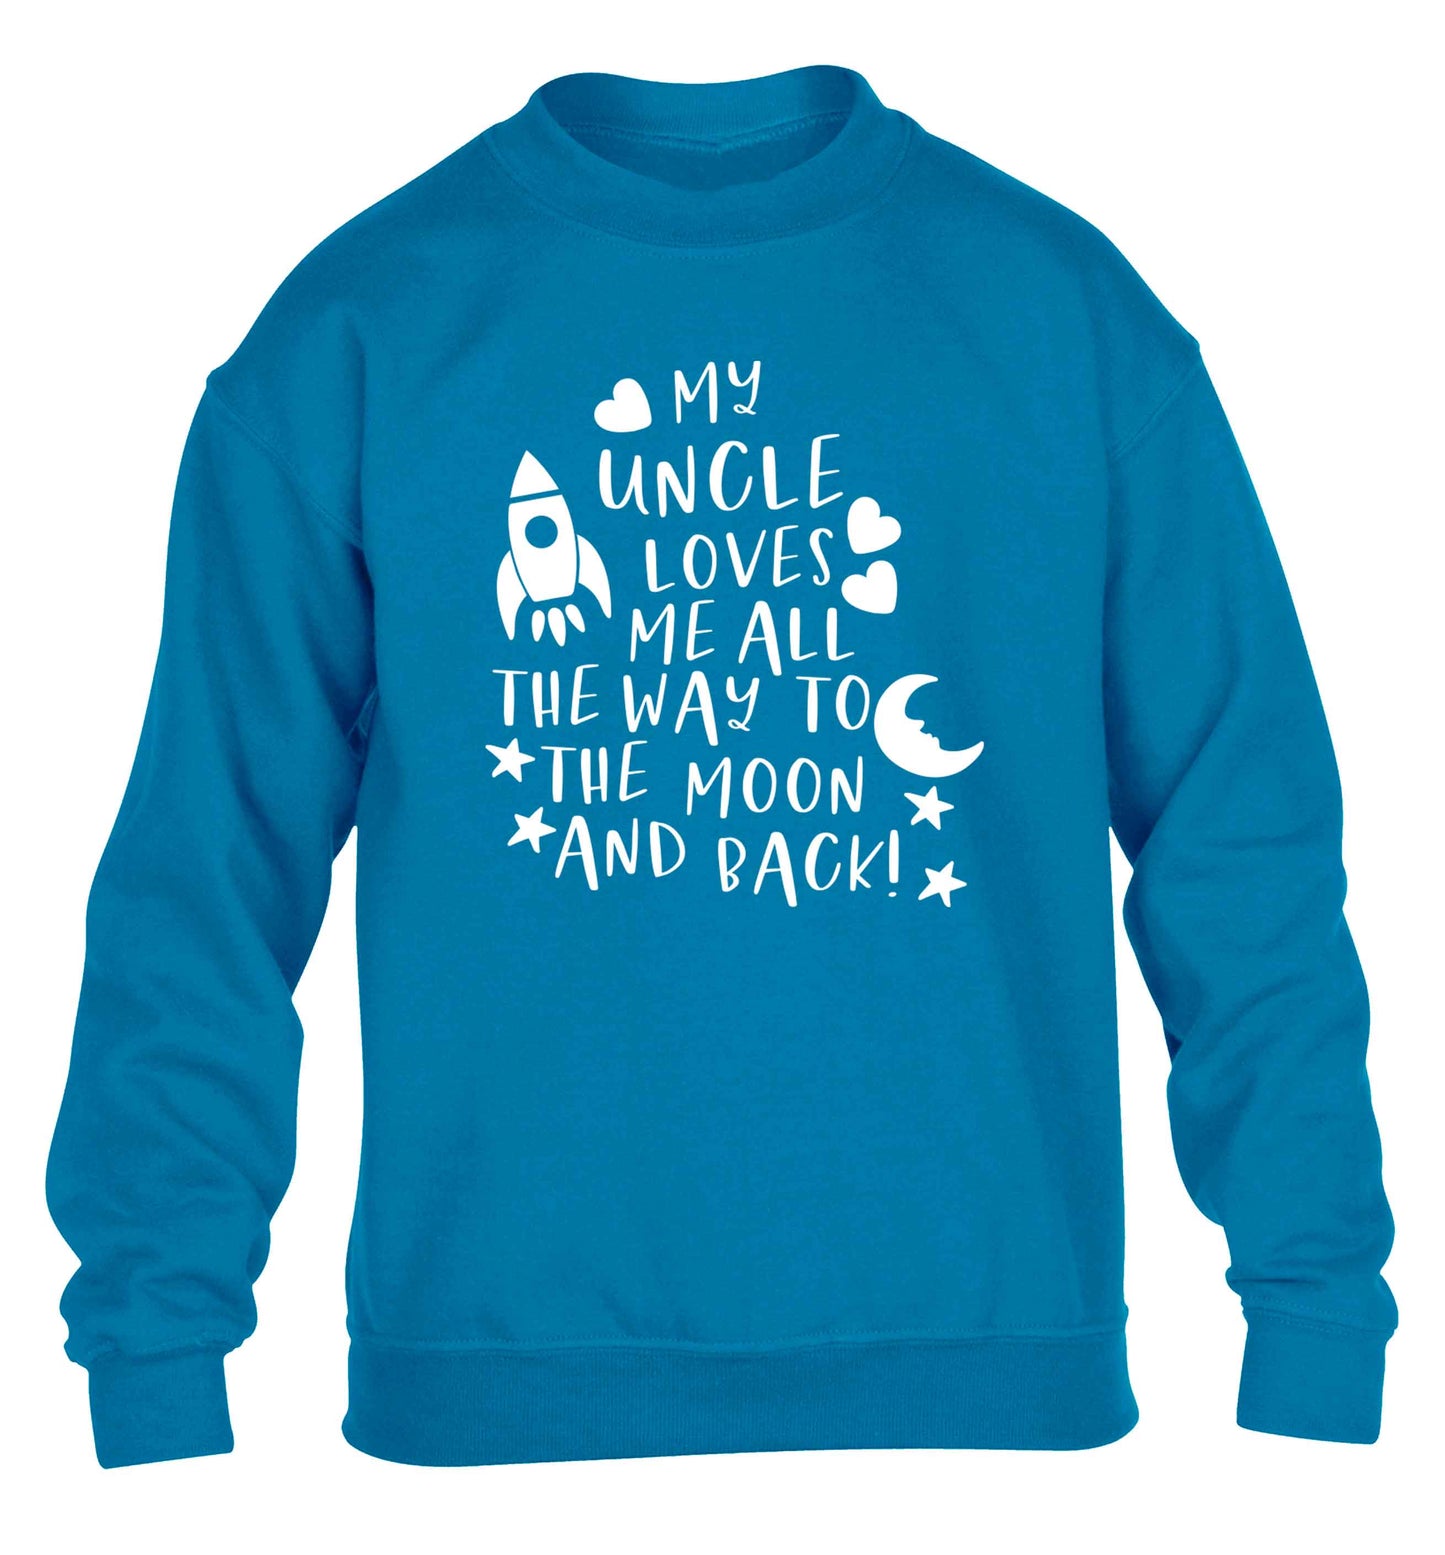 My uncle loves me all the way to the moon and back children's blue sweater 12-13 Years